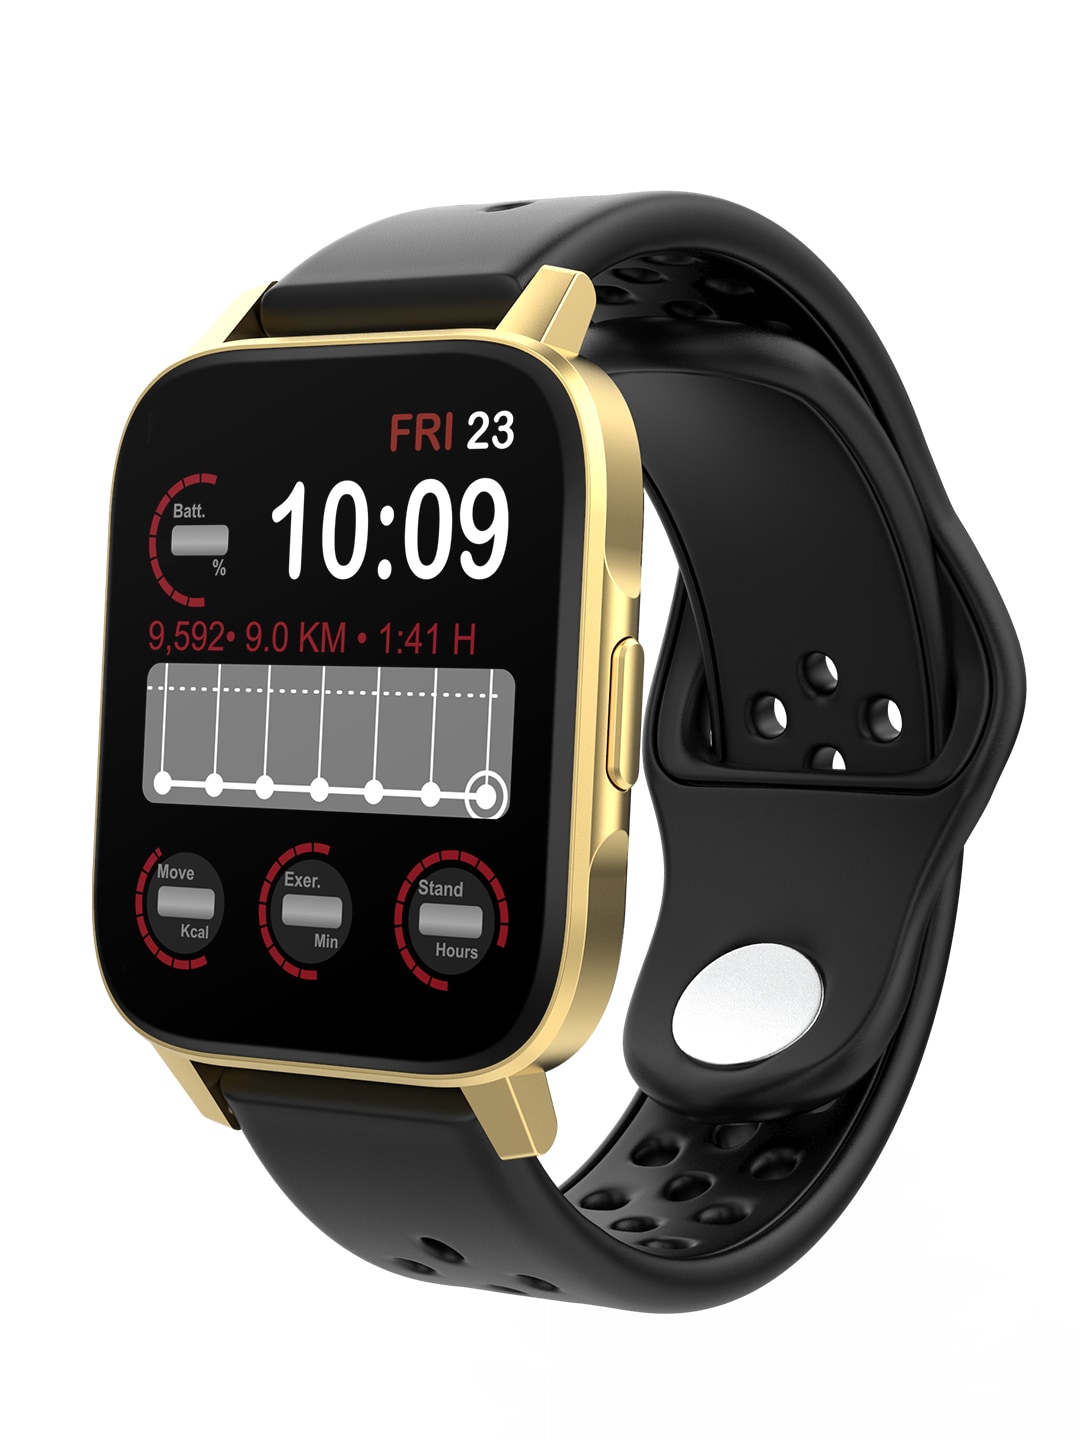 TAGG Verve Lite Smartwatch - Gold Price in India